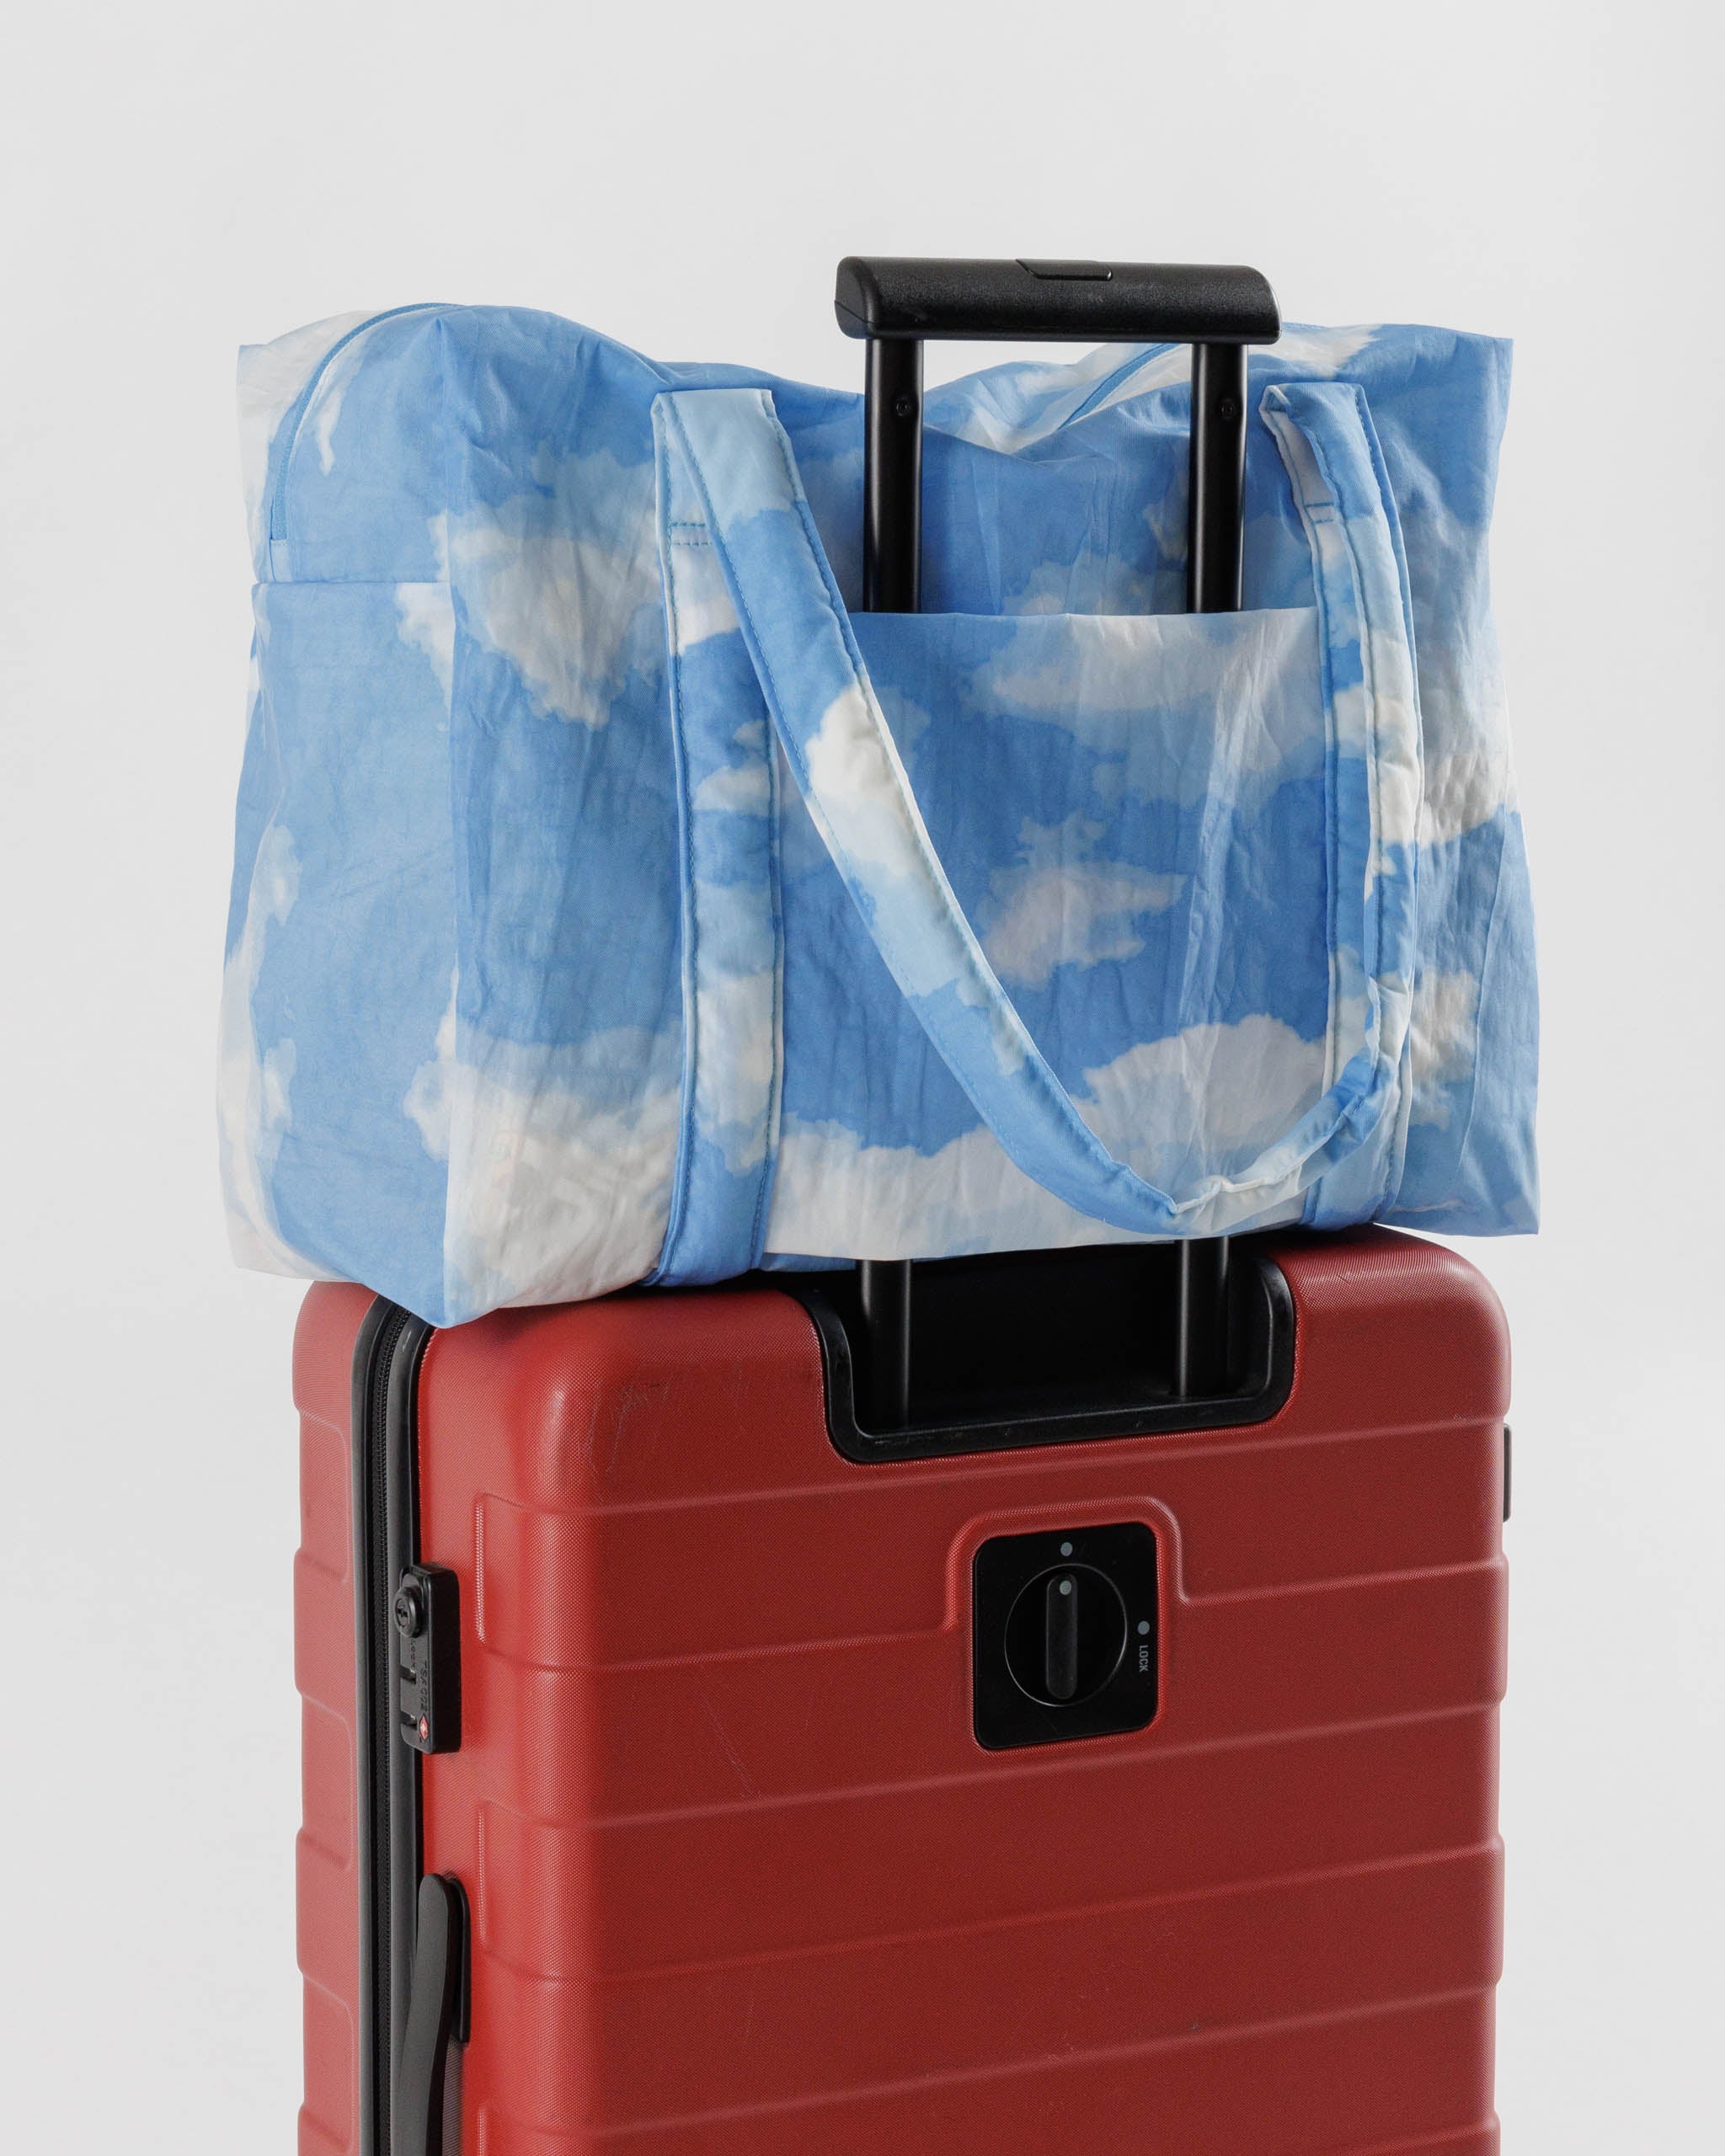 baggu-carry-on-bag-sitting-on-top-of-suitcase